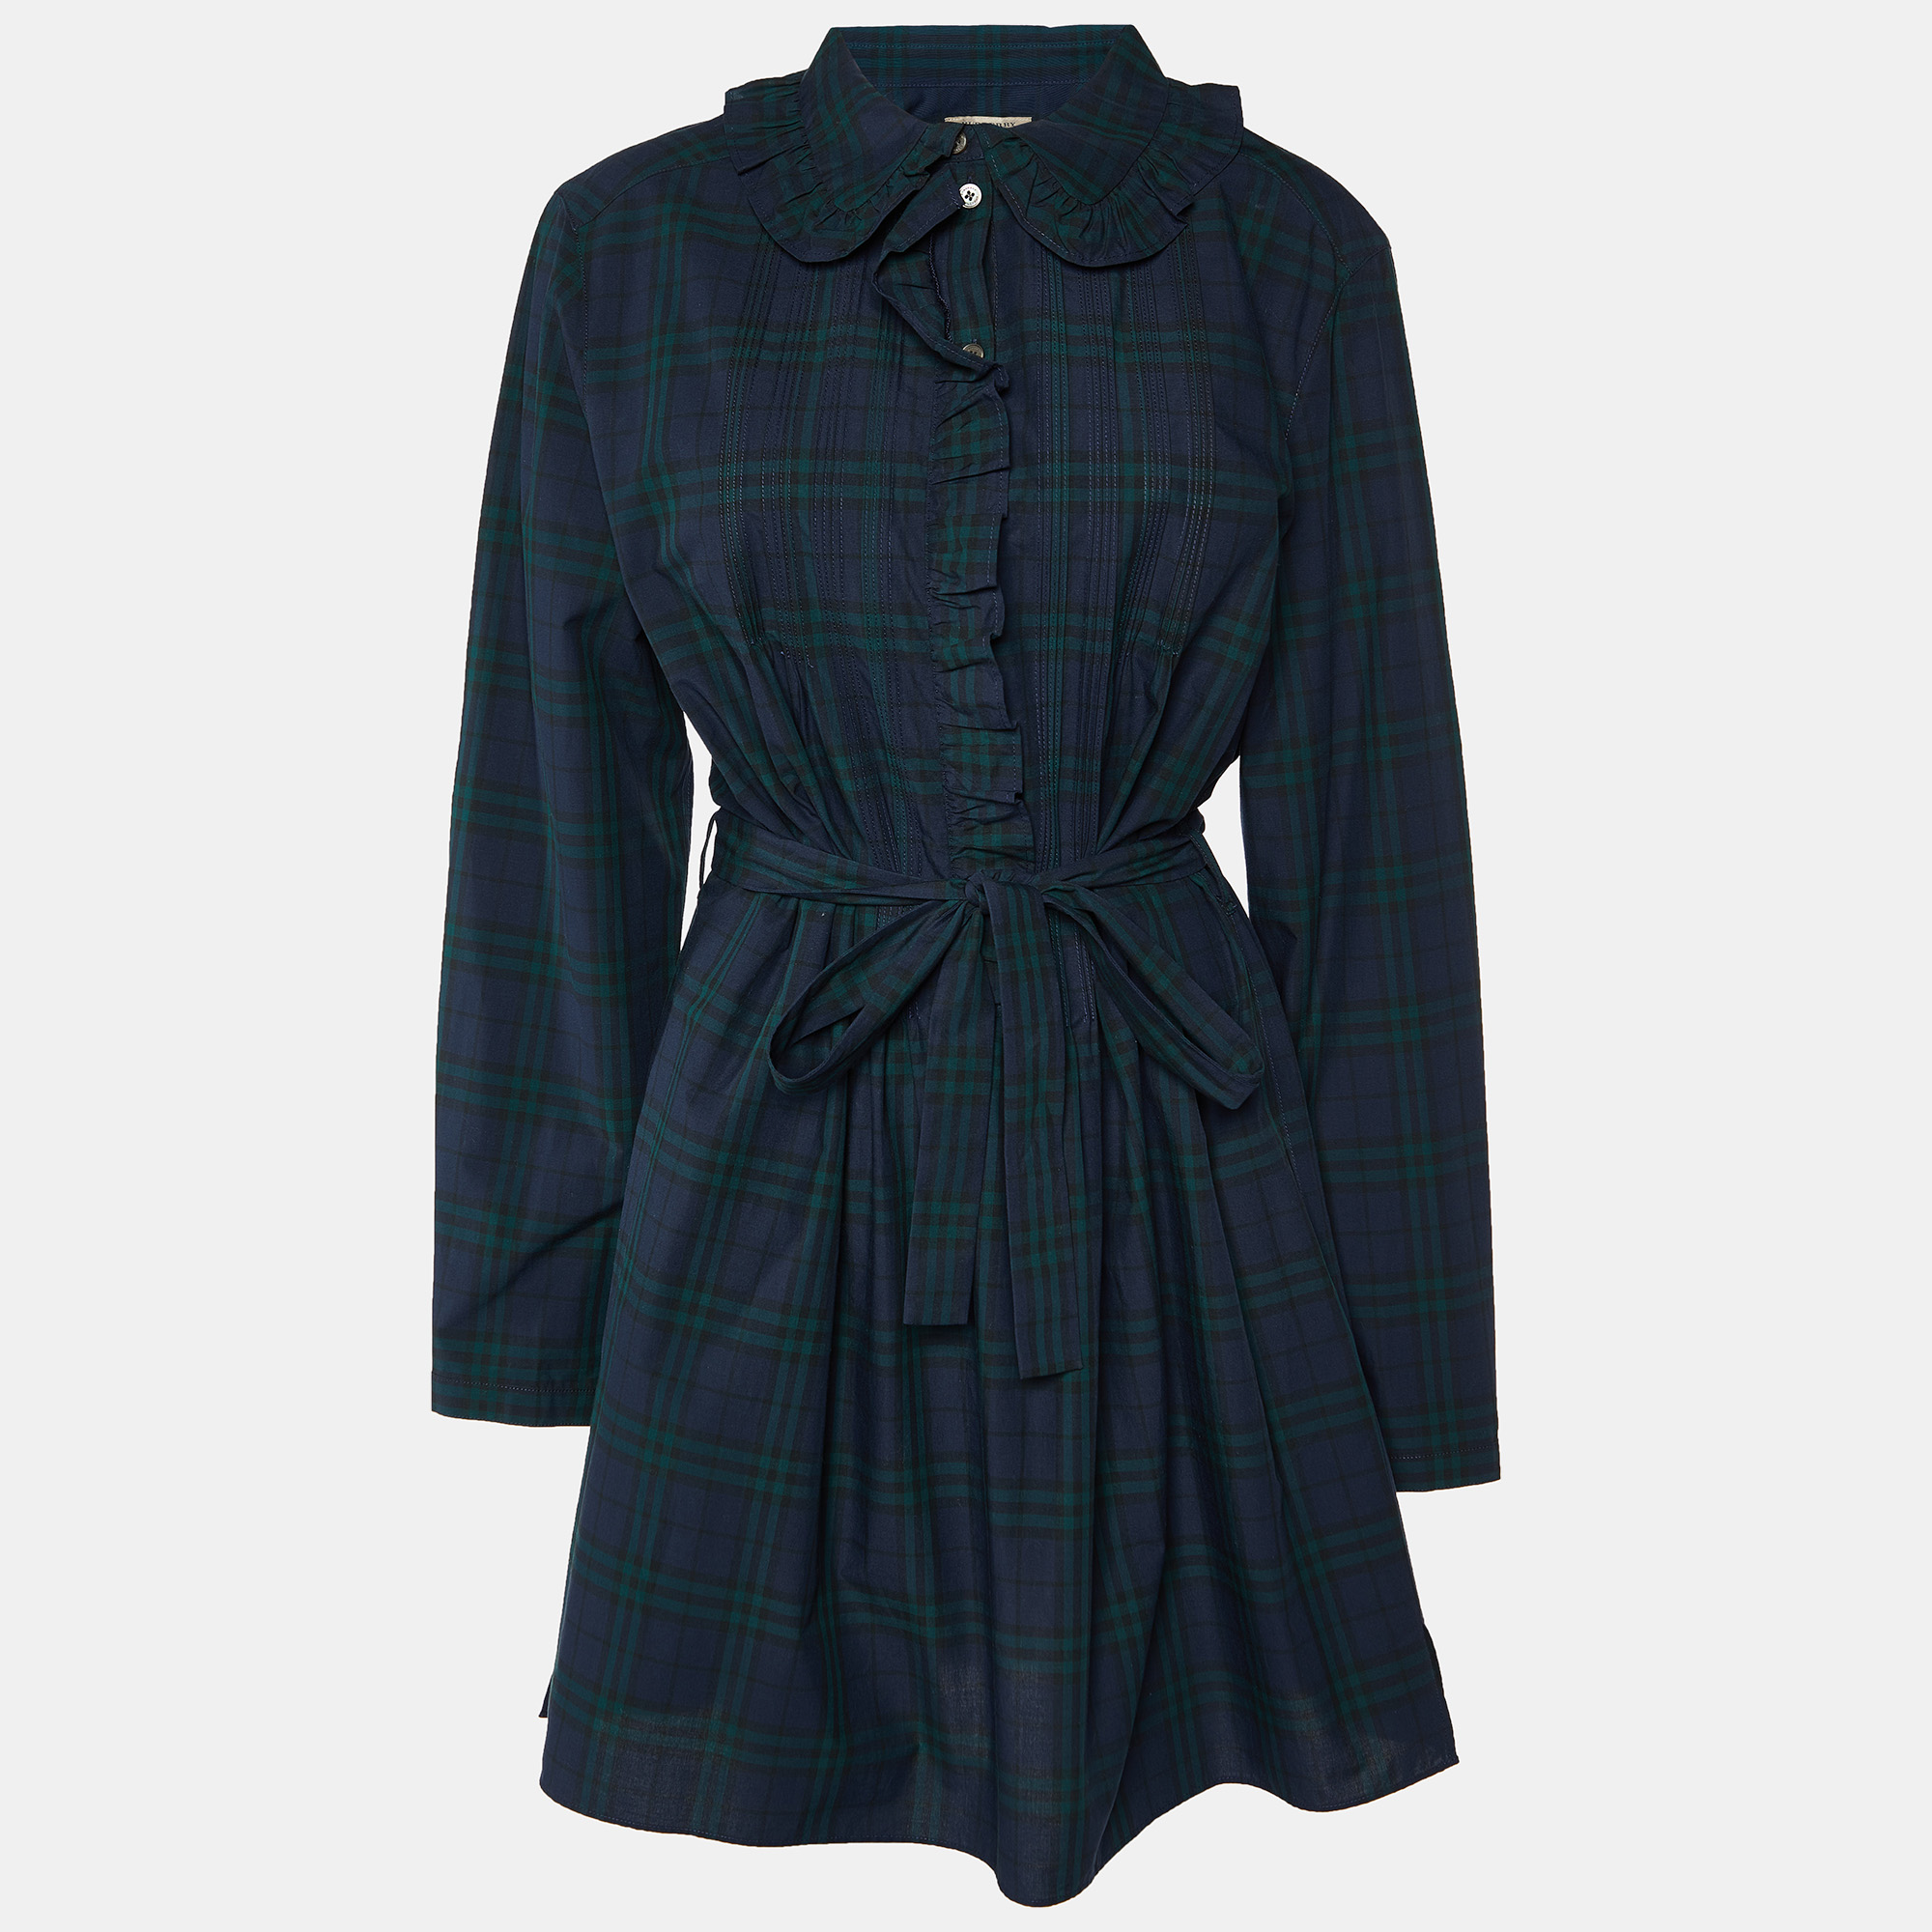 Burberry navy blue/green plaid check cotton belted dress l